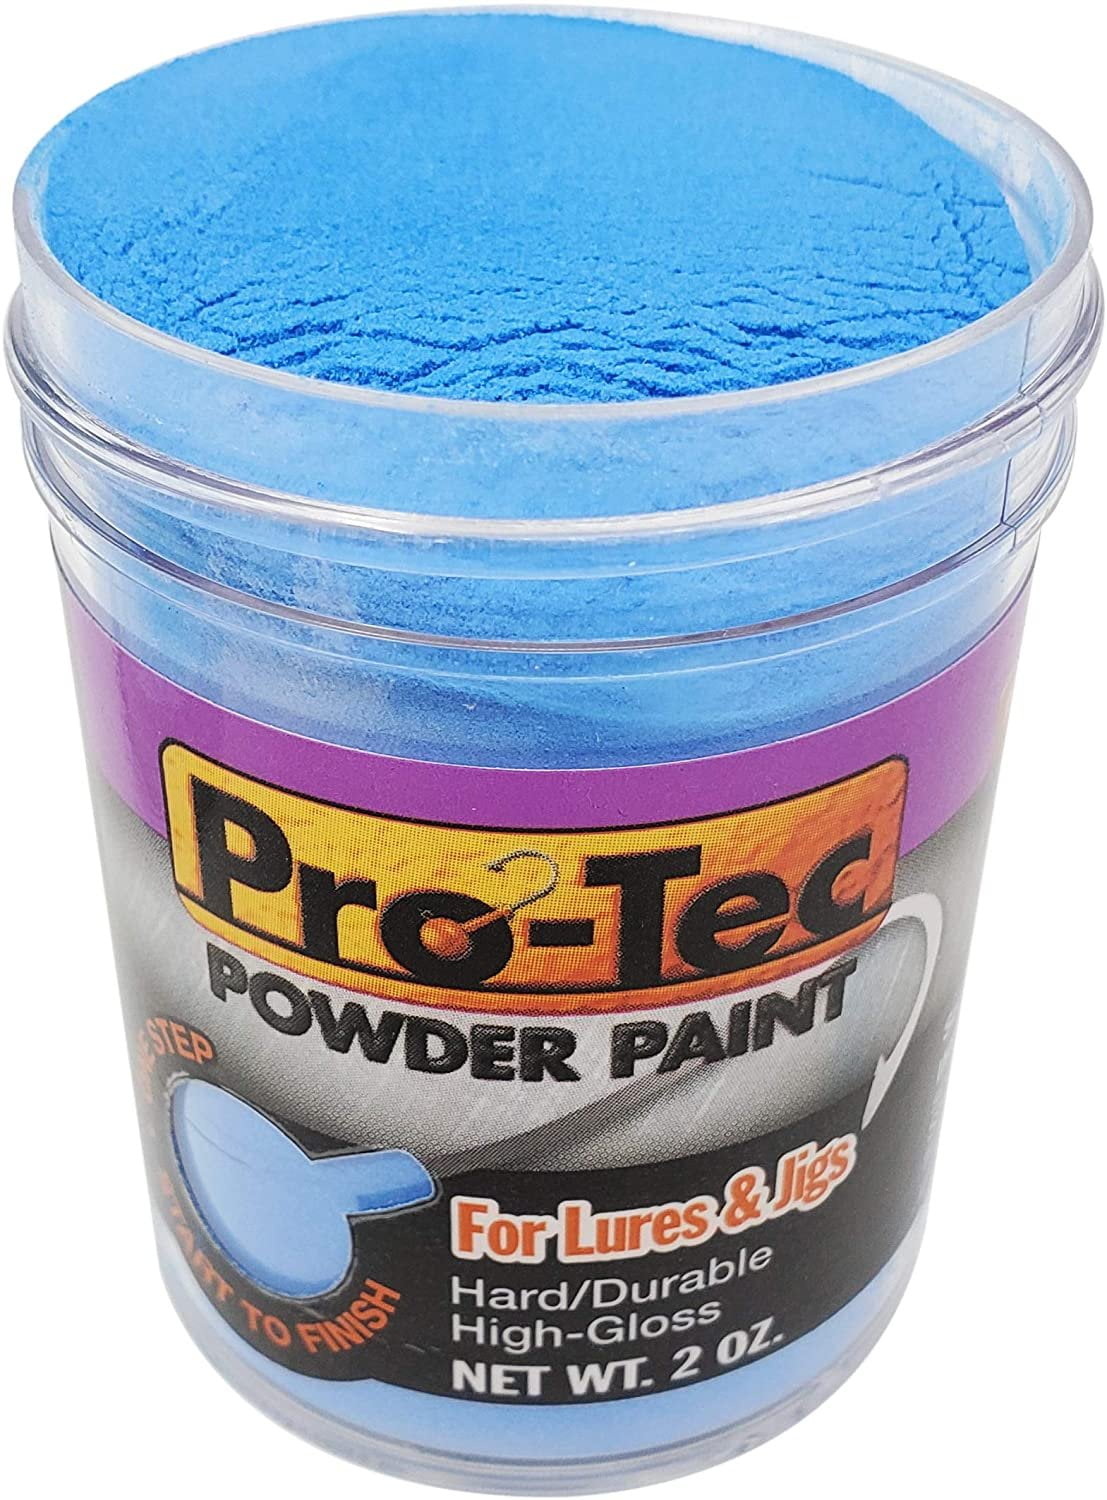 Pro-Tec Jigs and Lures Powder Paint, Jig Head Fishing Paint, Fishing Lure  Paint Candy Blue